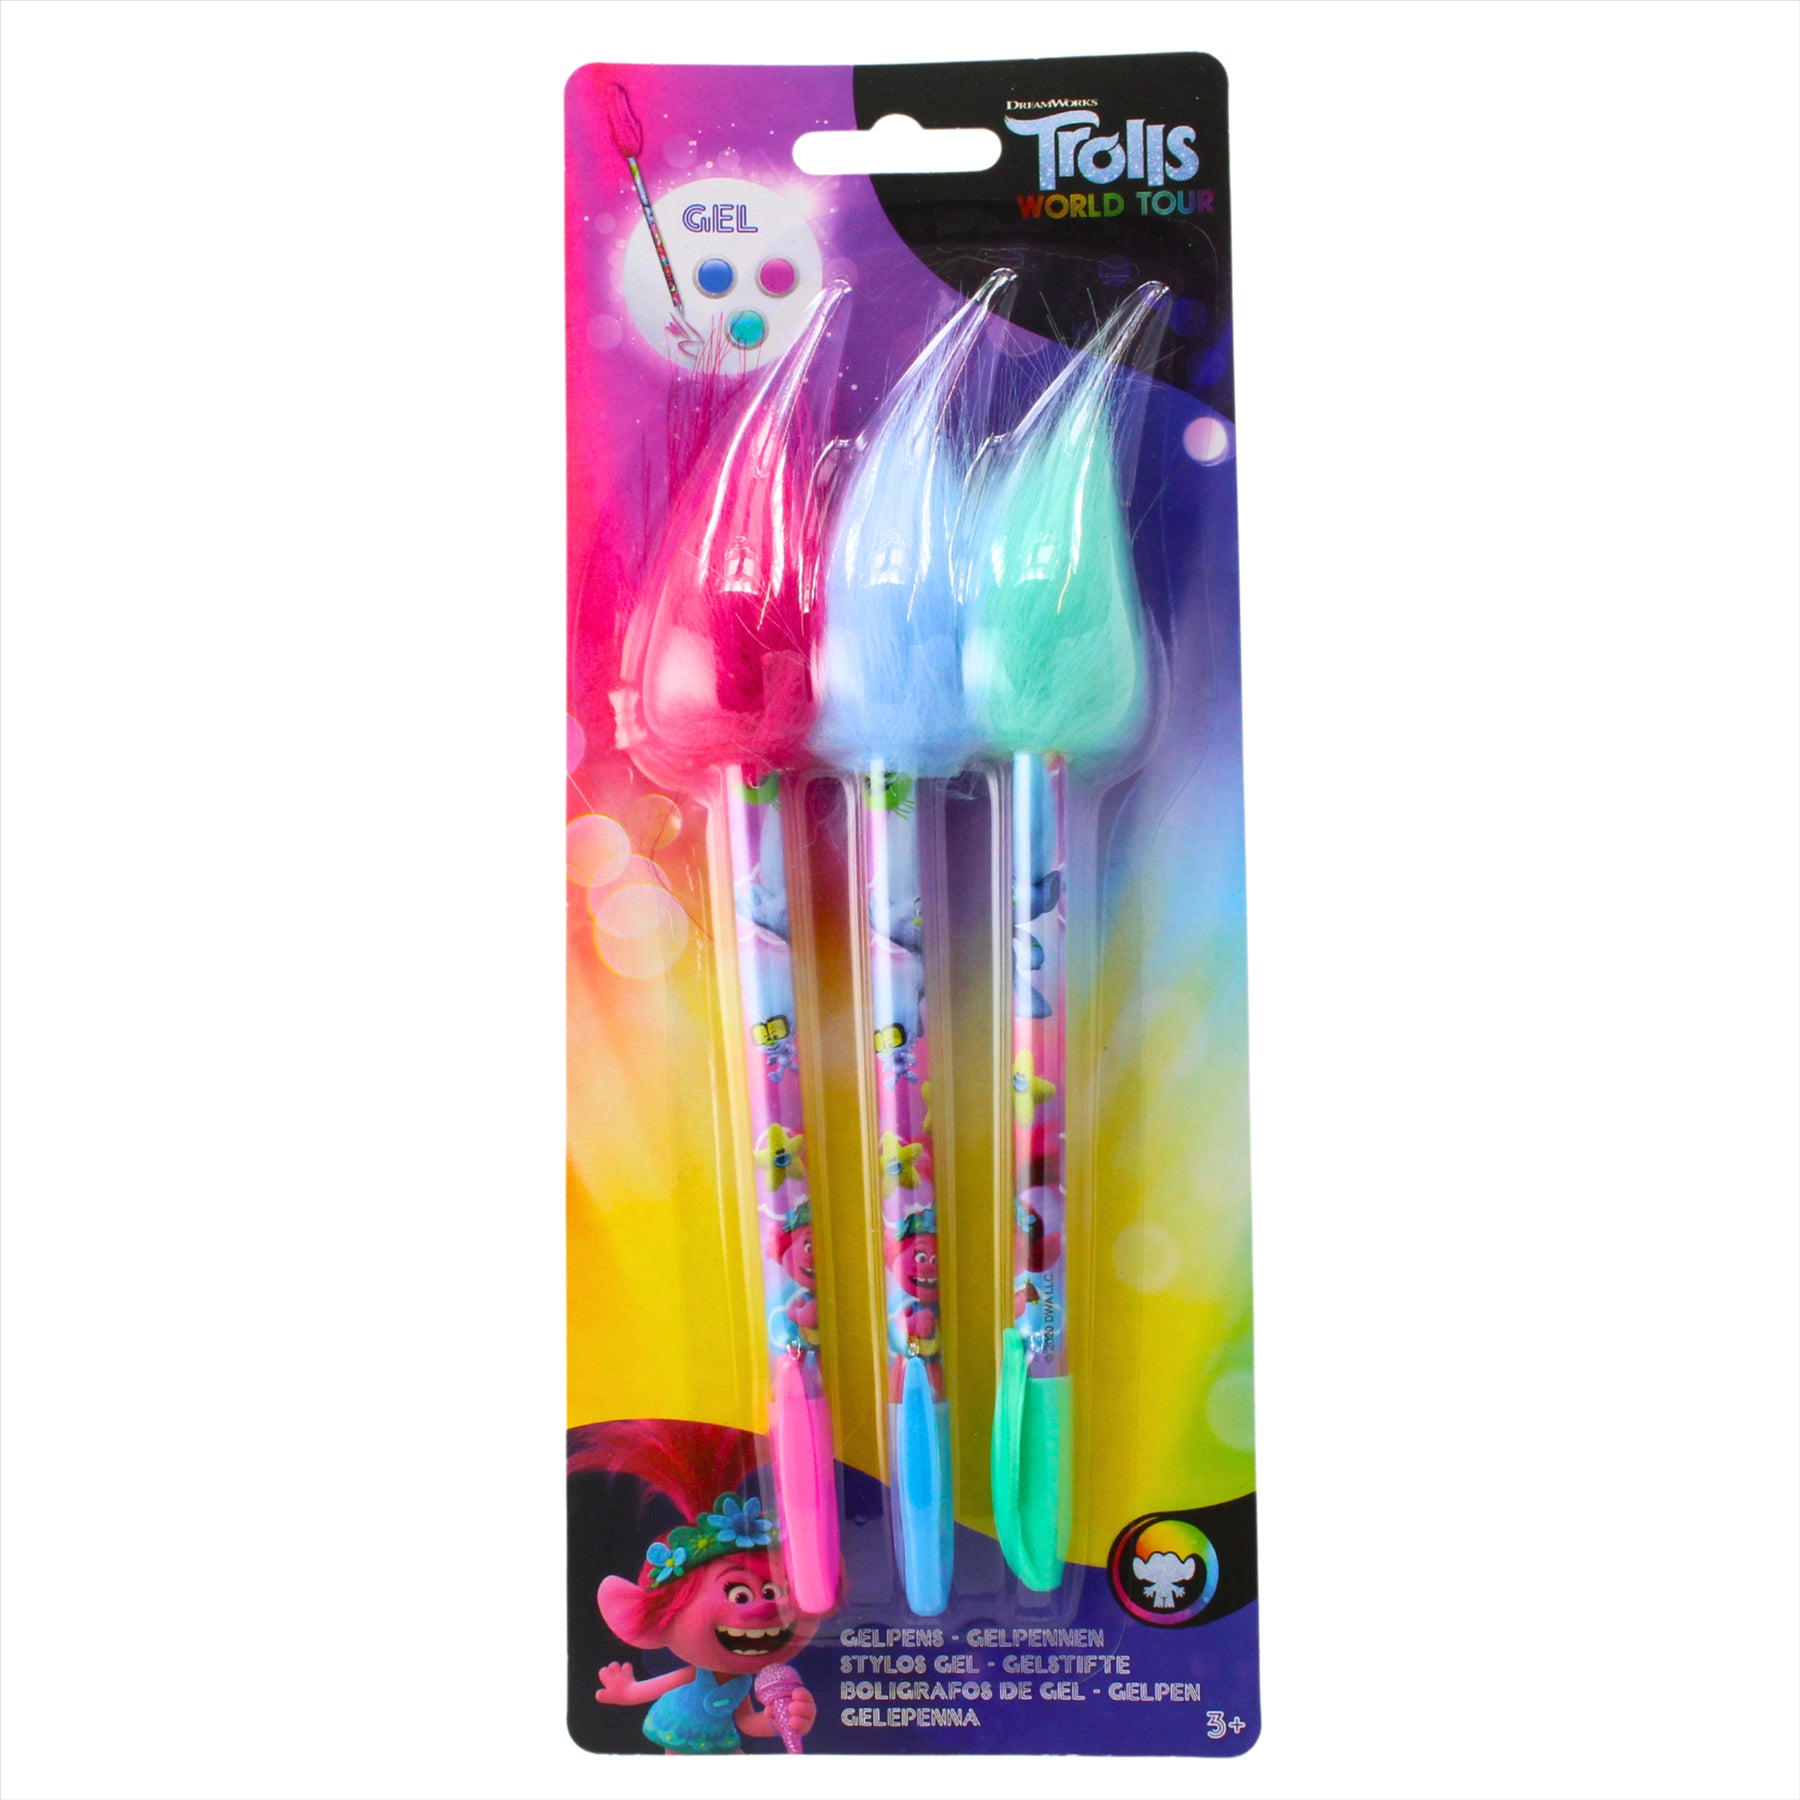 Trolls World Tour Poppy and Friends Multi Coloured Gel Pens - Pack of 3